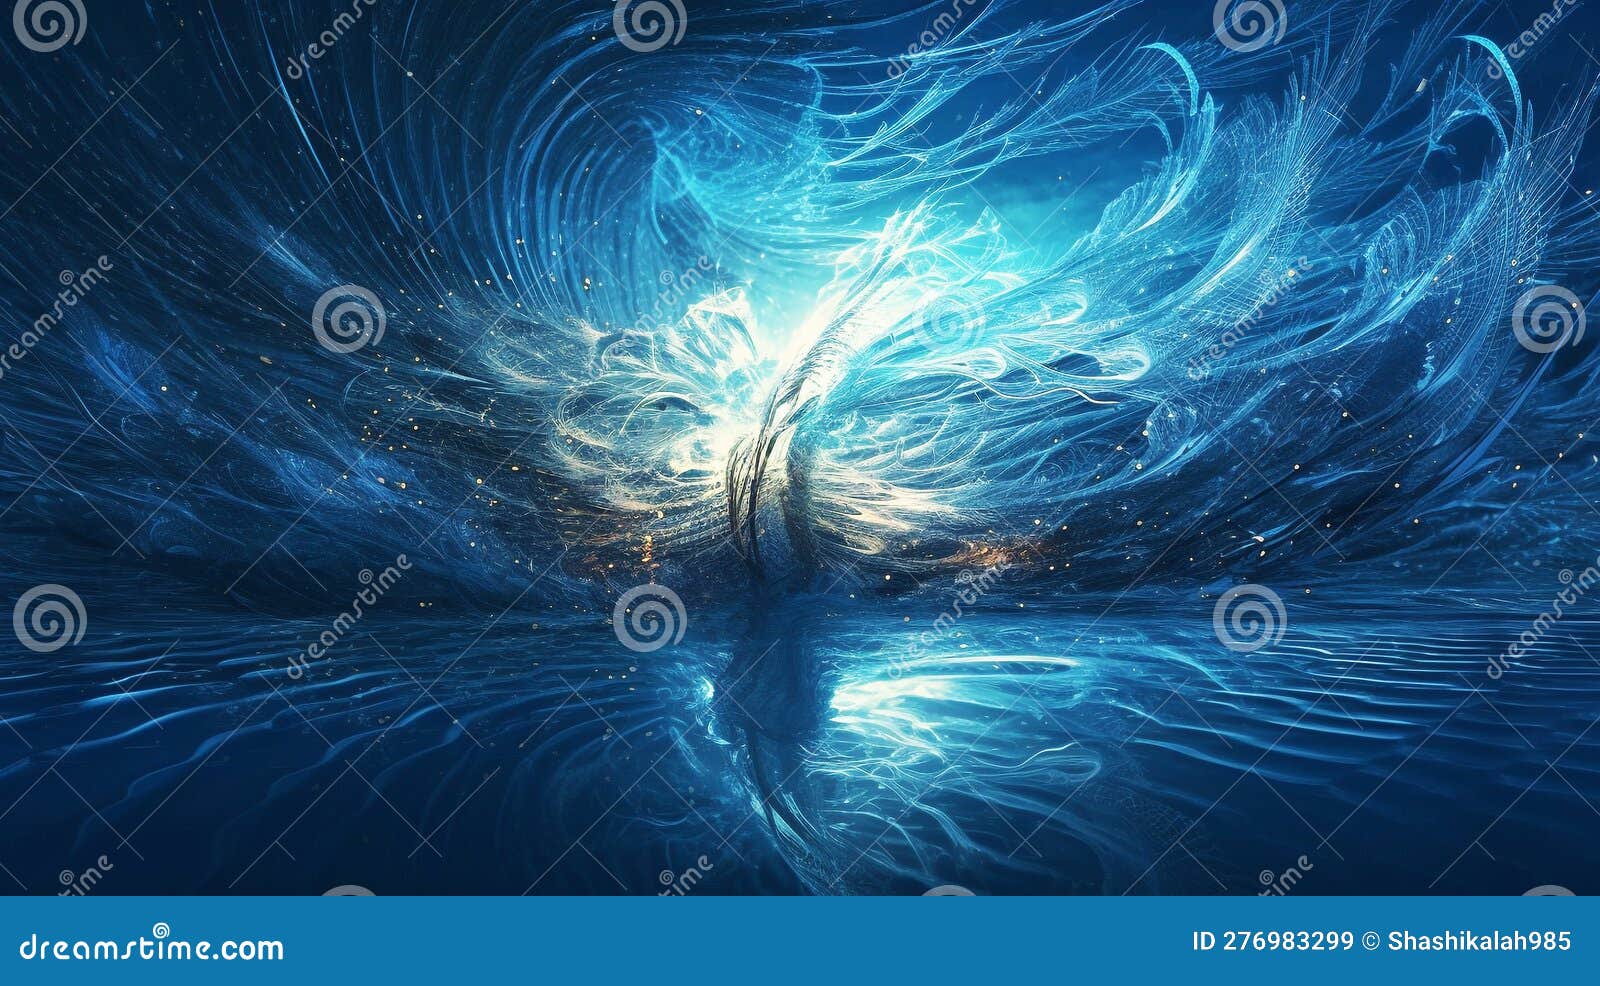 A Highly Complicated Digital Artwork of Waves and the Underwater World  Stock Illustration - Illustration of circle, highly: 276983299